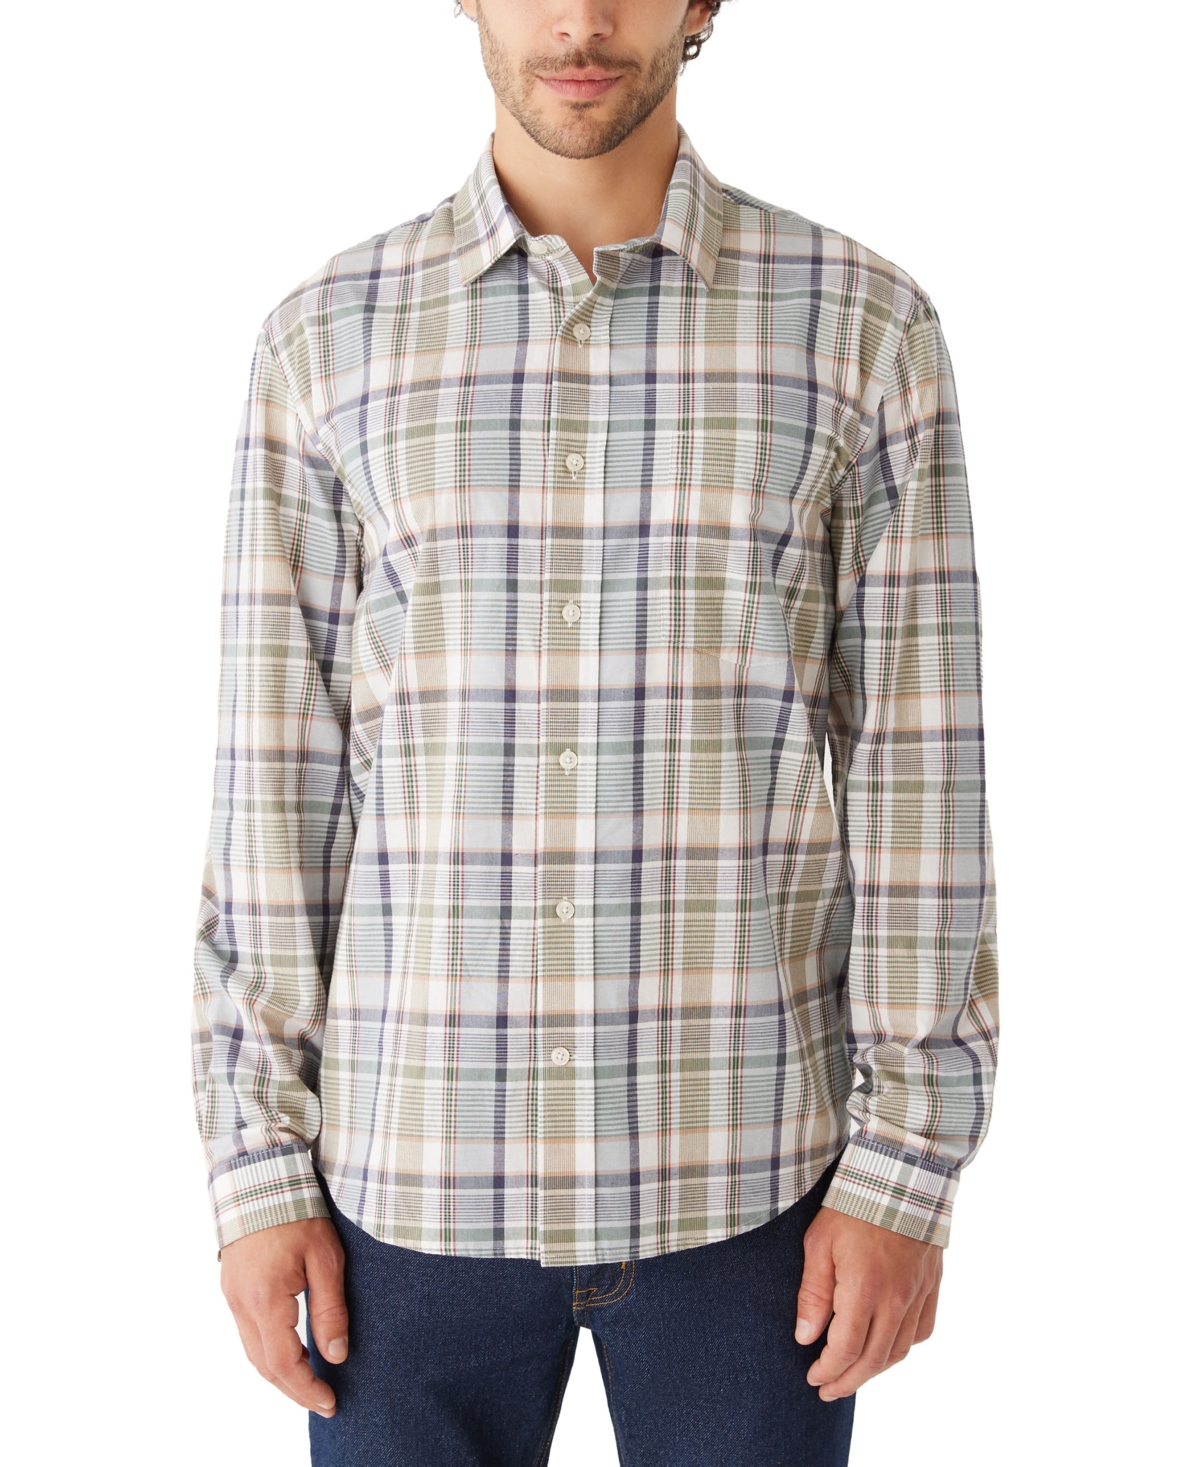 Men's Relaxed-Fit Multi-Plaid Long-Sleeve Button-Up Shirt - Dark Forest